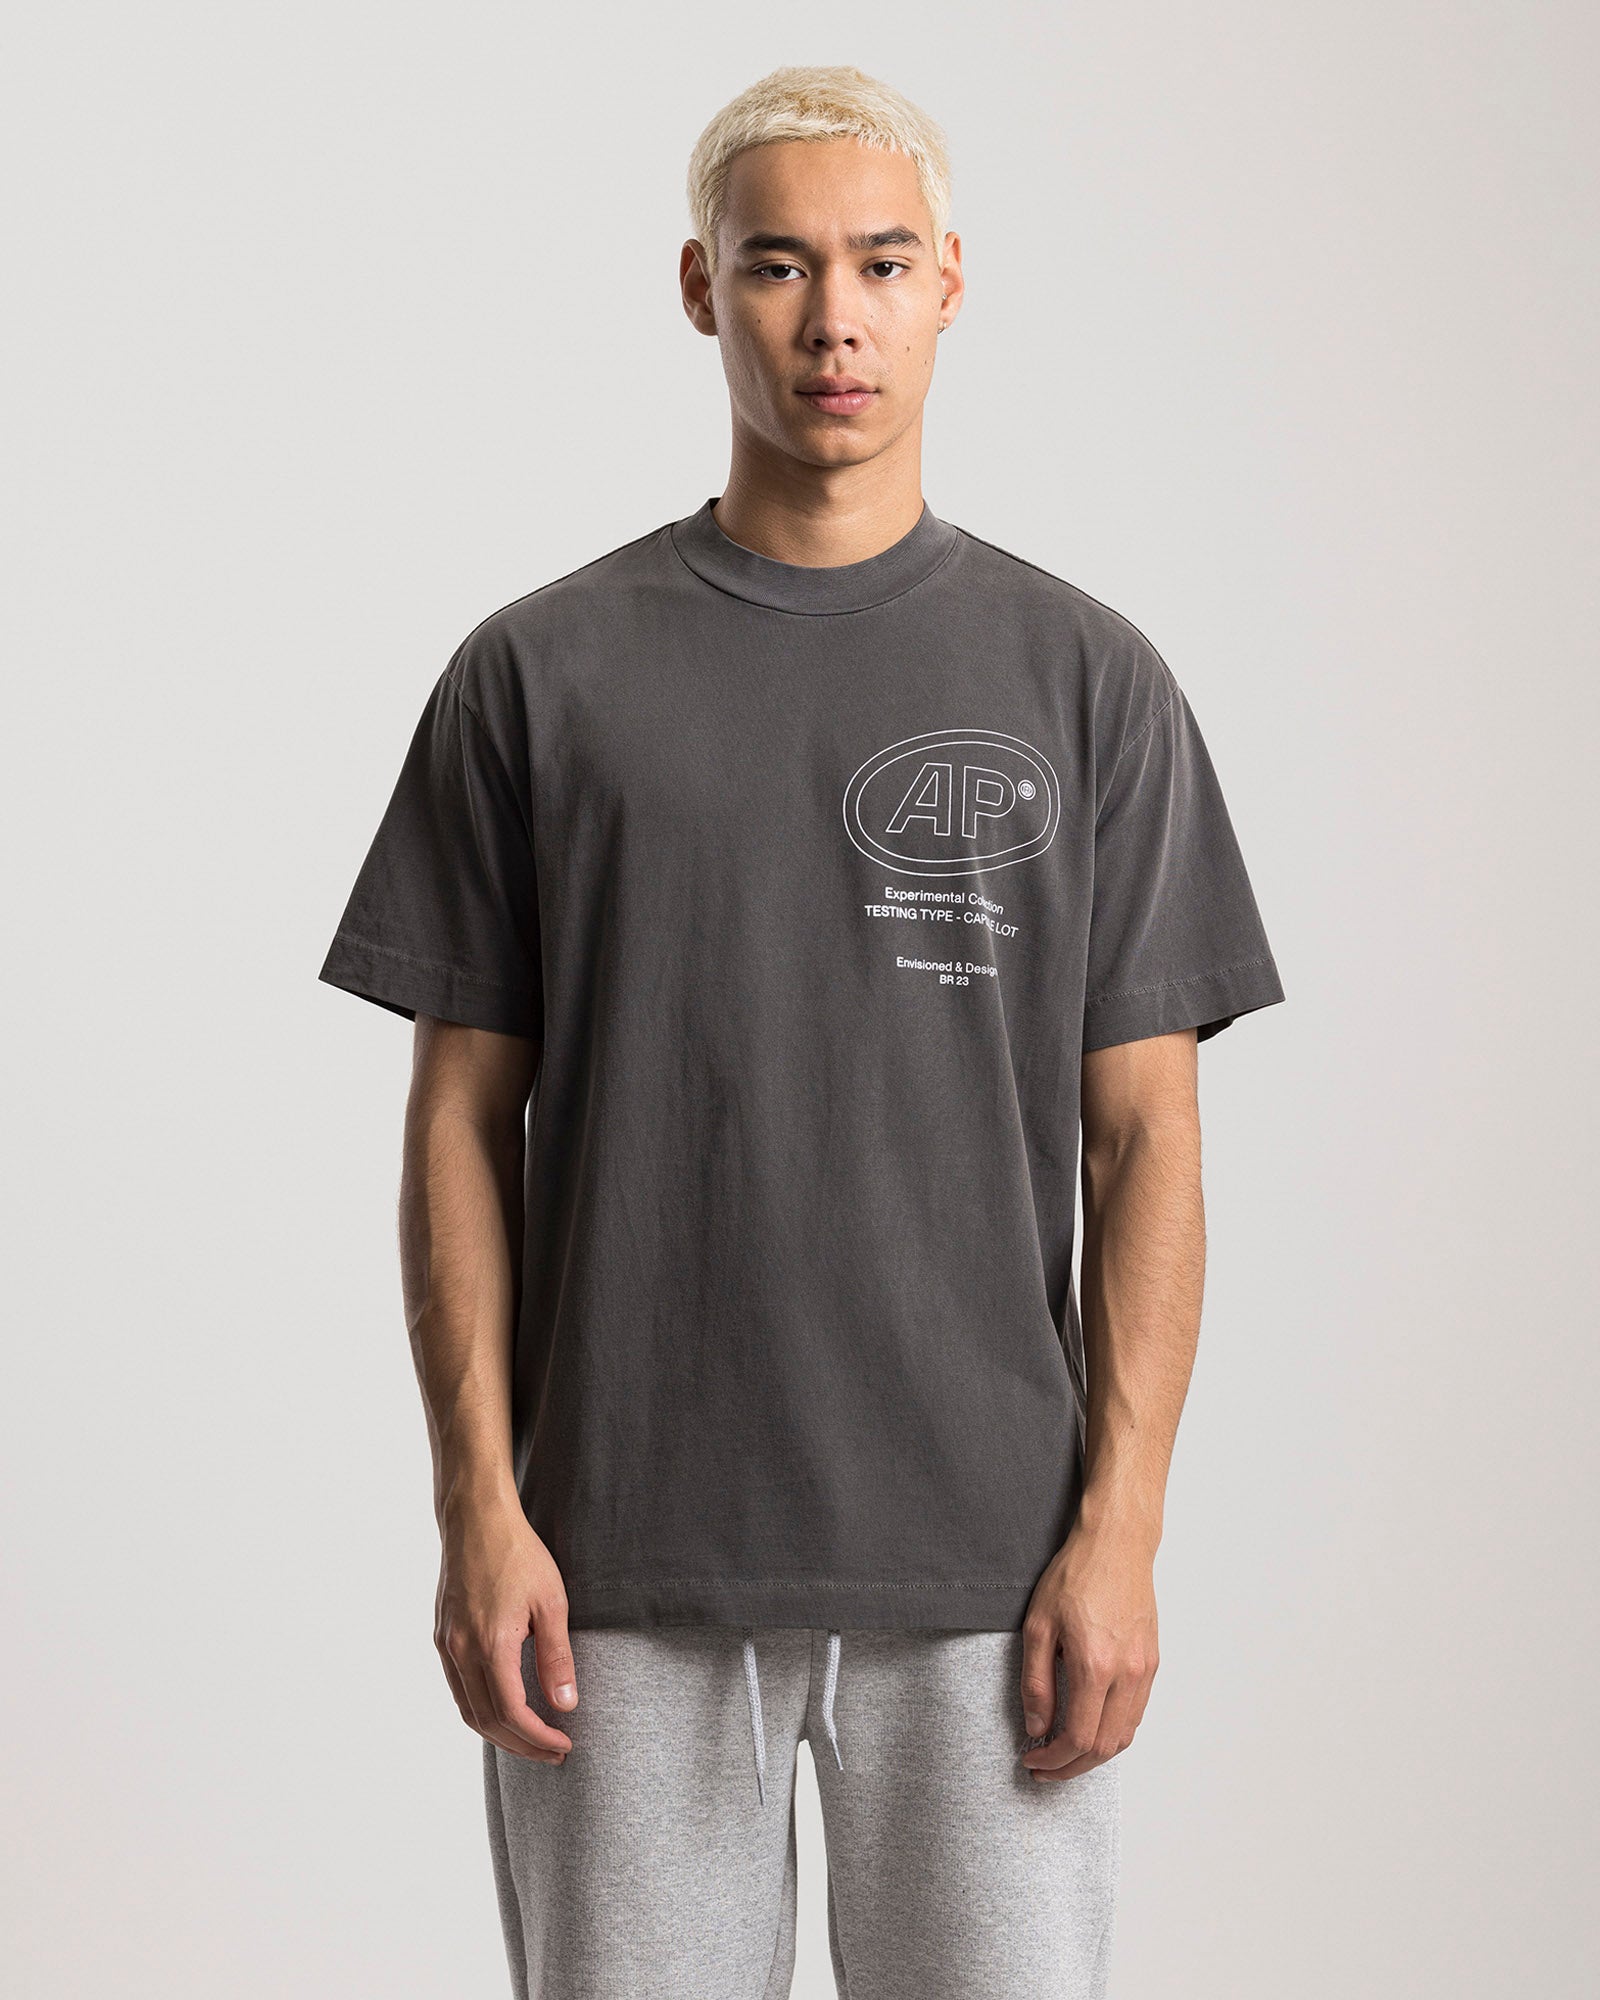 APHASE - T-Shirt Double AP Stoned Gray